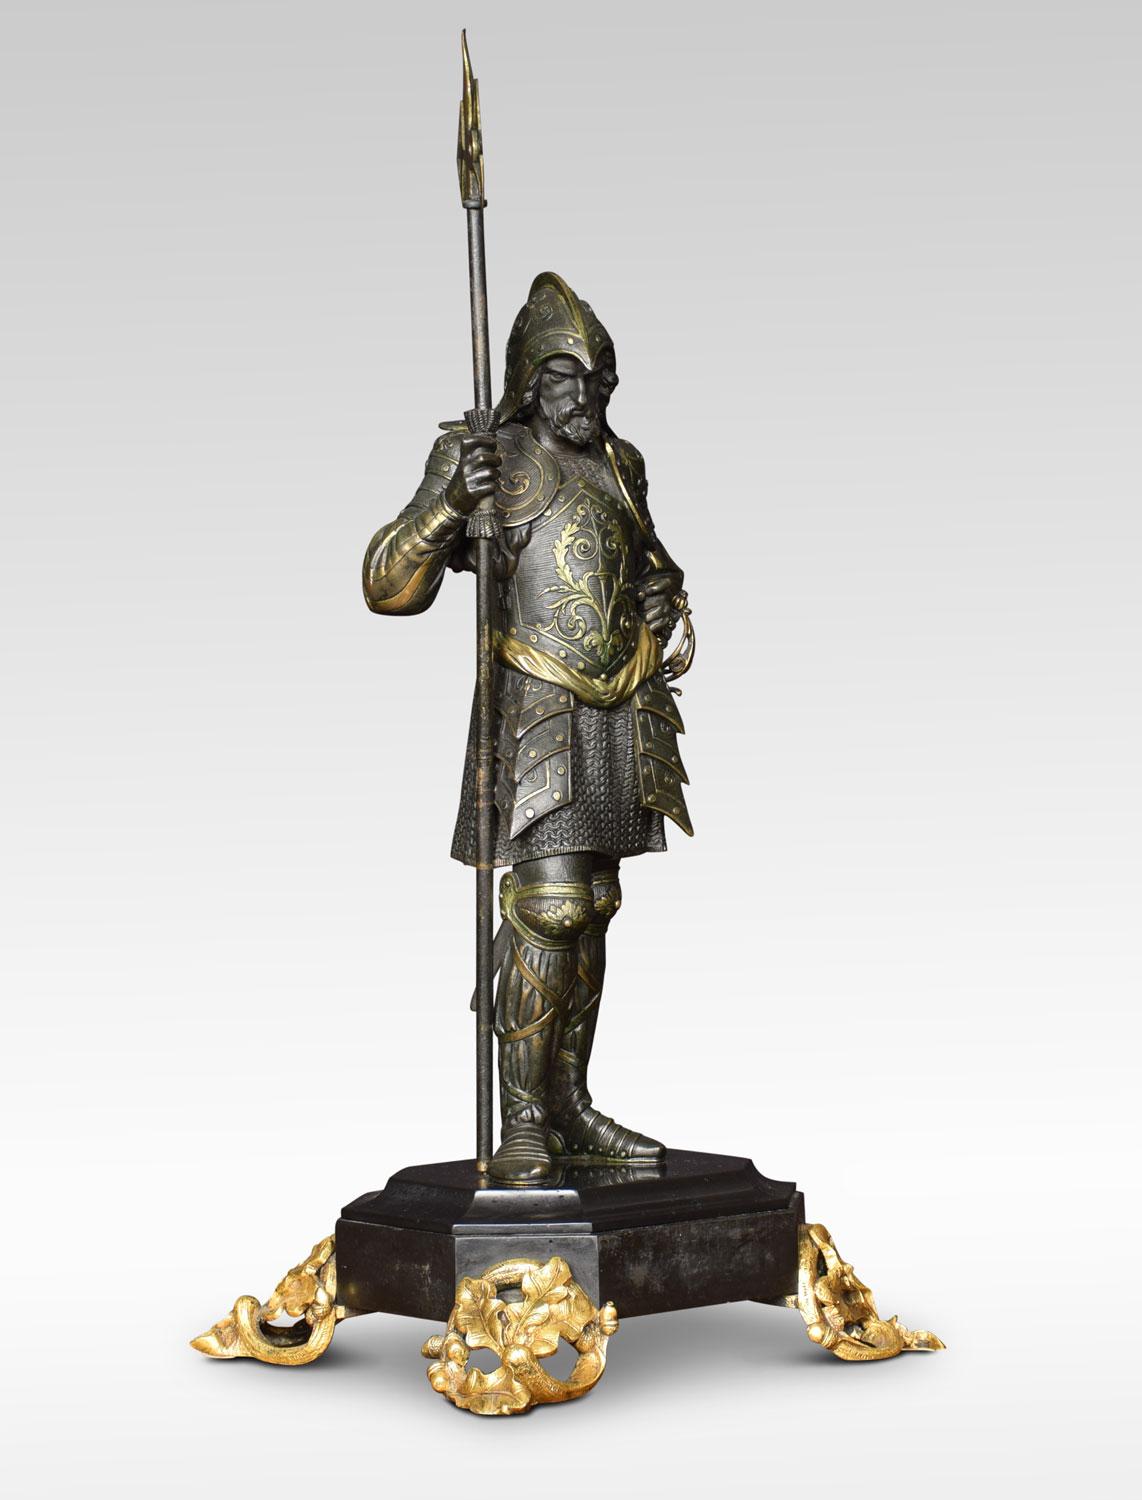 Pair of bronzed medieval soldiers dressed in armour, each mounted on octagonal base with gilt metal feet in the form of oak branches.
Dimensions:
Height 25 inches
Width 11 inches
Depth 10 inches.